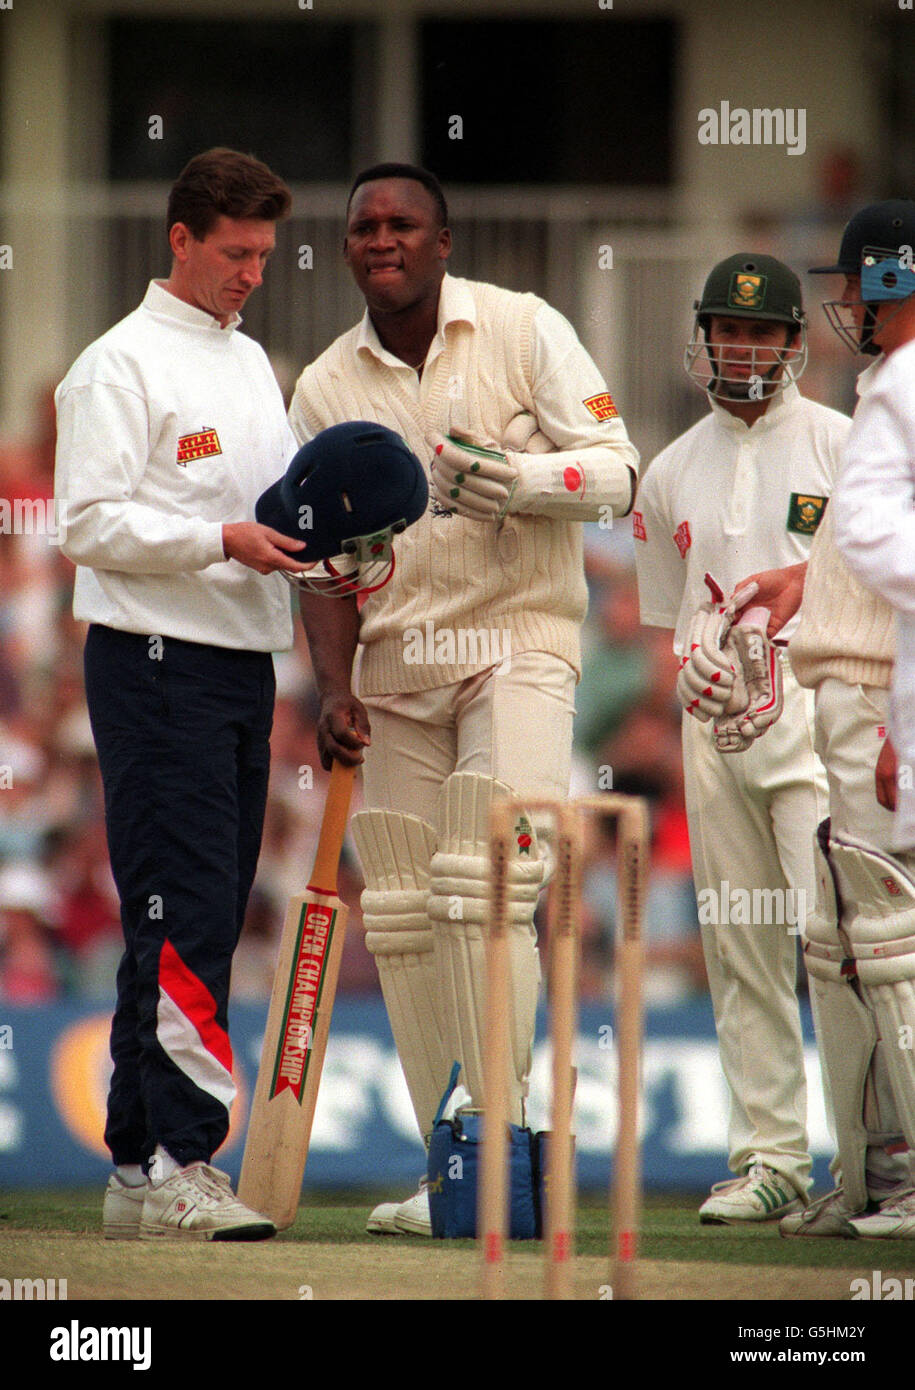 England v South Africa Test Match England's Devon Malcolm grimaces after receiving a blow on his protective helmet with a bouncer bowled by South Africa's Fanie De Villers. Stock Photo